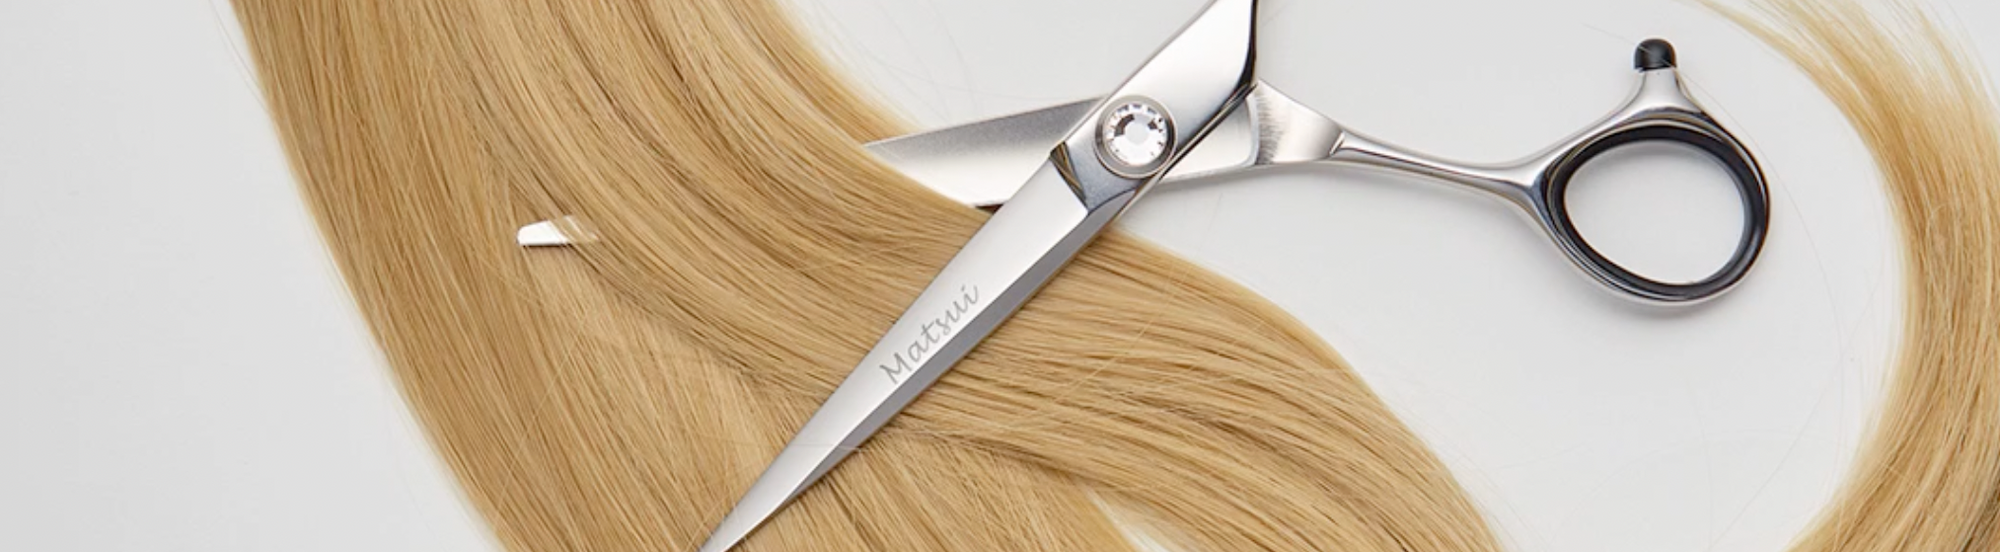 What’s the Difference Between High Quality and Low Quality Hairdressing Scissors?